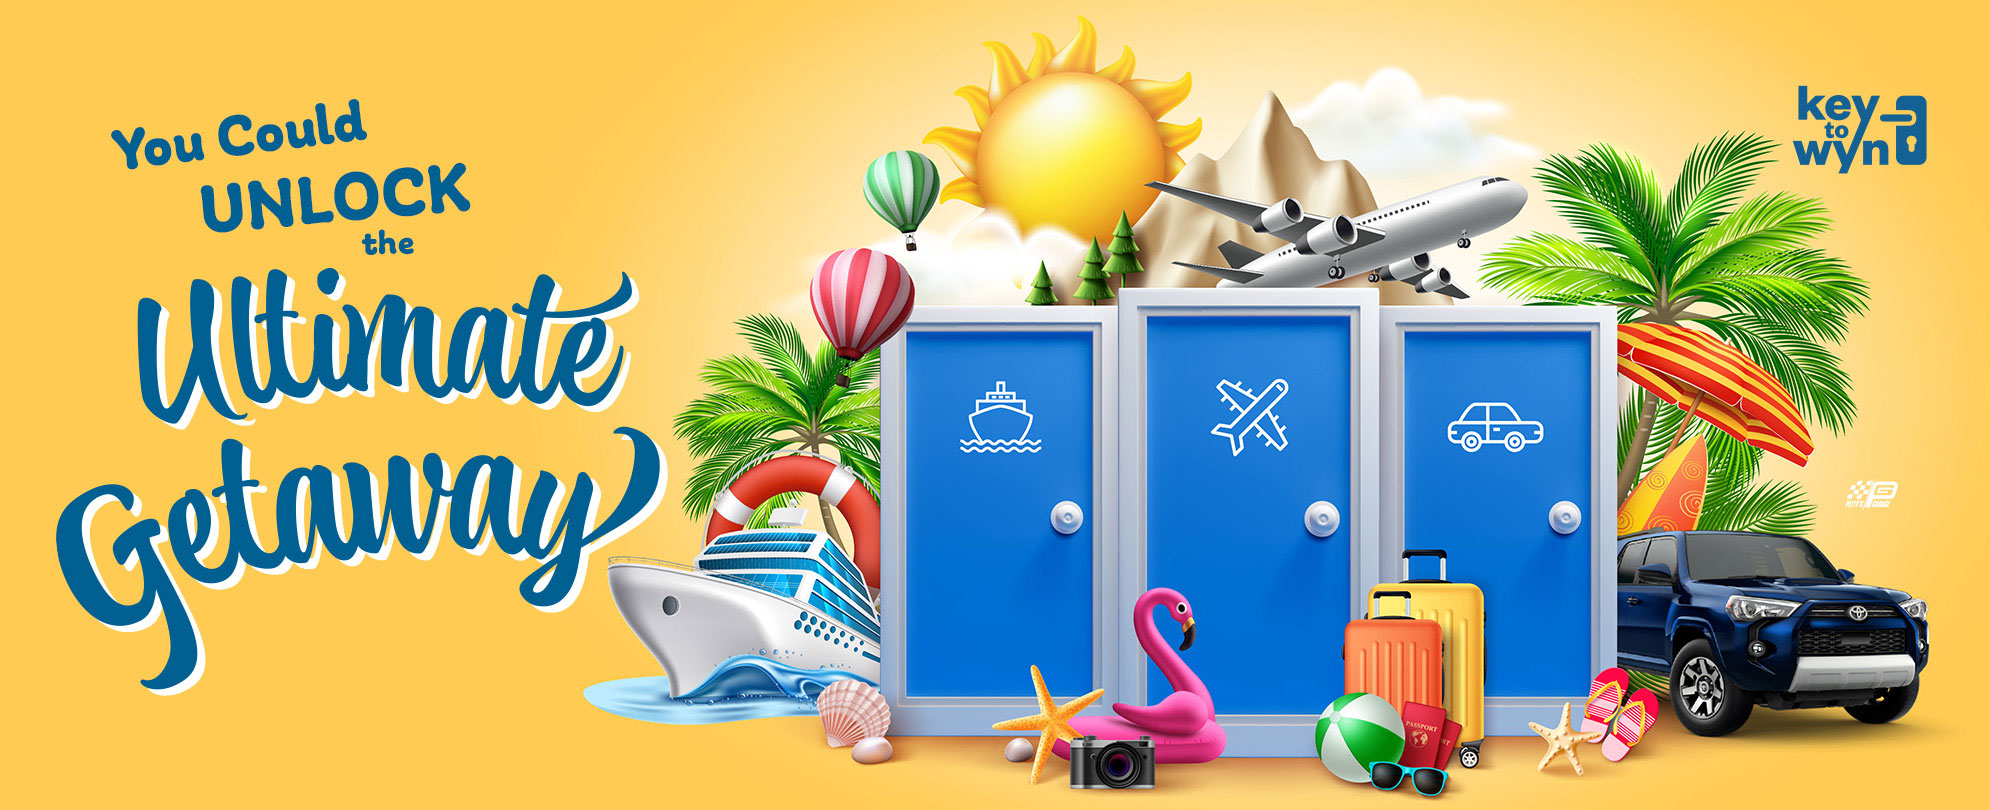 Blue text "You could unlock the ultimate getaway - Key To Wyn" on a yellow background with three blue doors surrounded by vacation icons including a cruise ship, sunshine, Toyota SUV, palm trees, suitcases, and more.